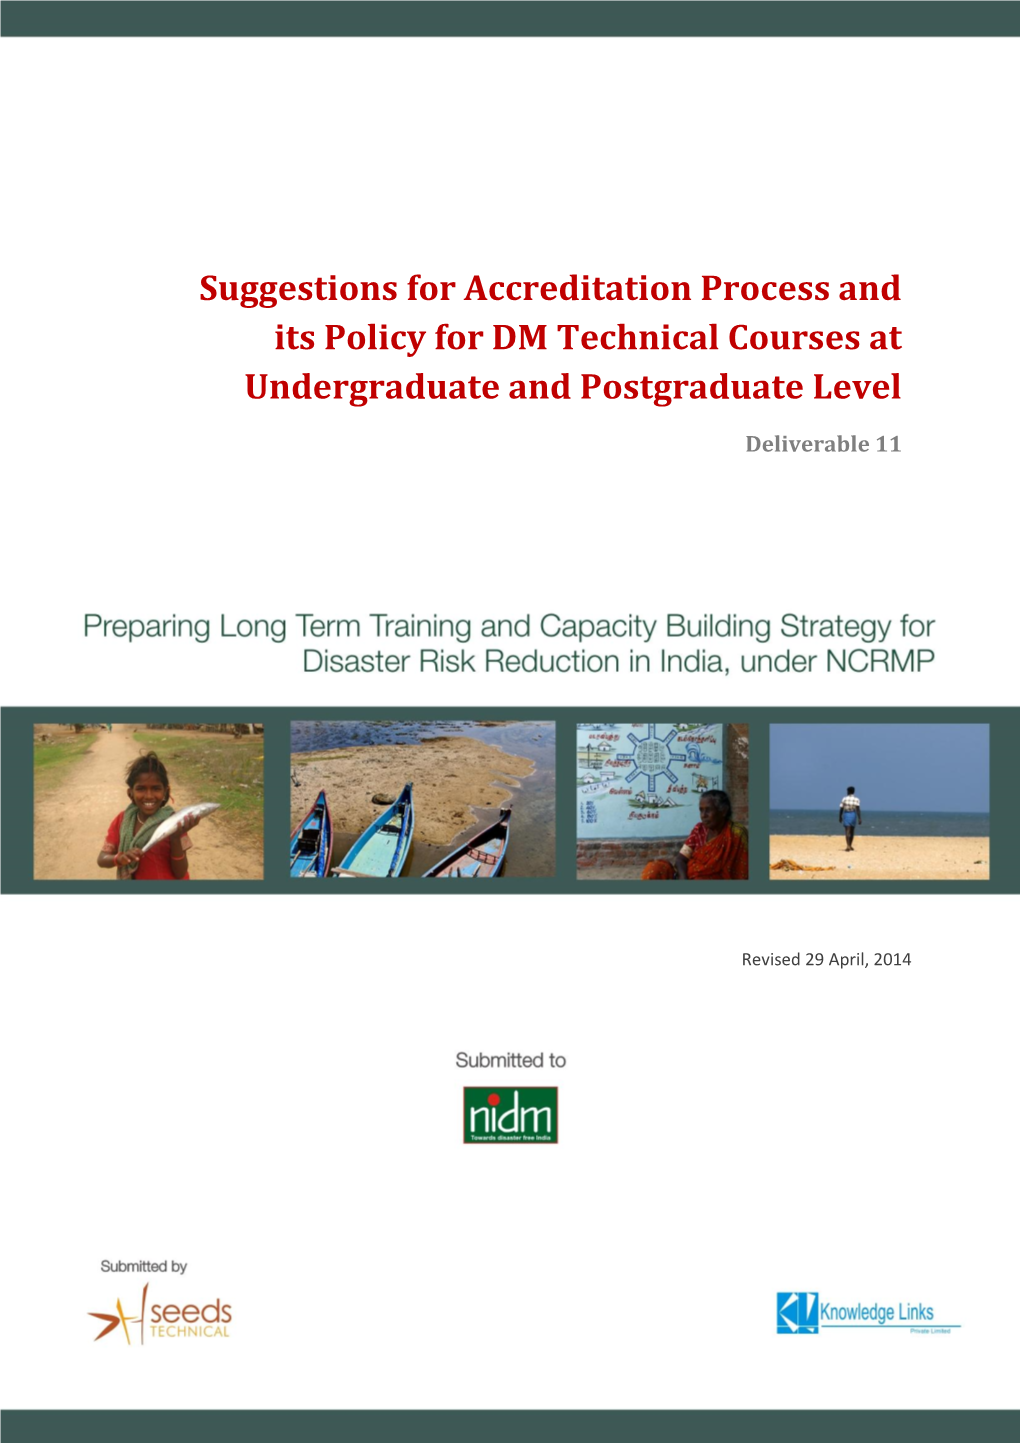 Suggestions for Accreditation Process and Its Policy for DM Technical Courses at Undergraduate and Postgraduate Level